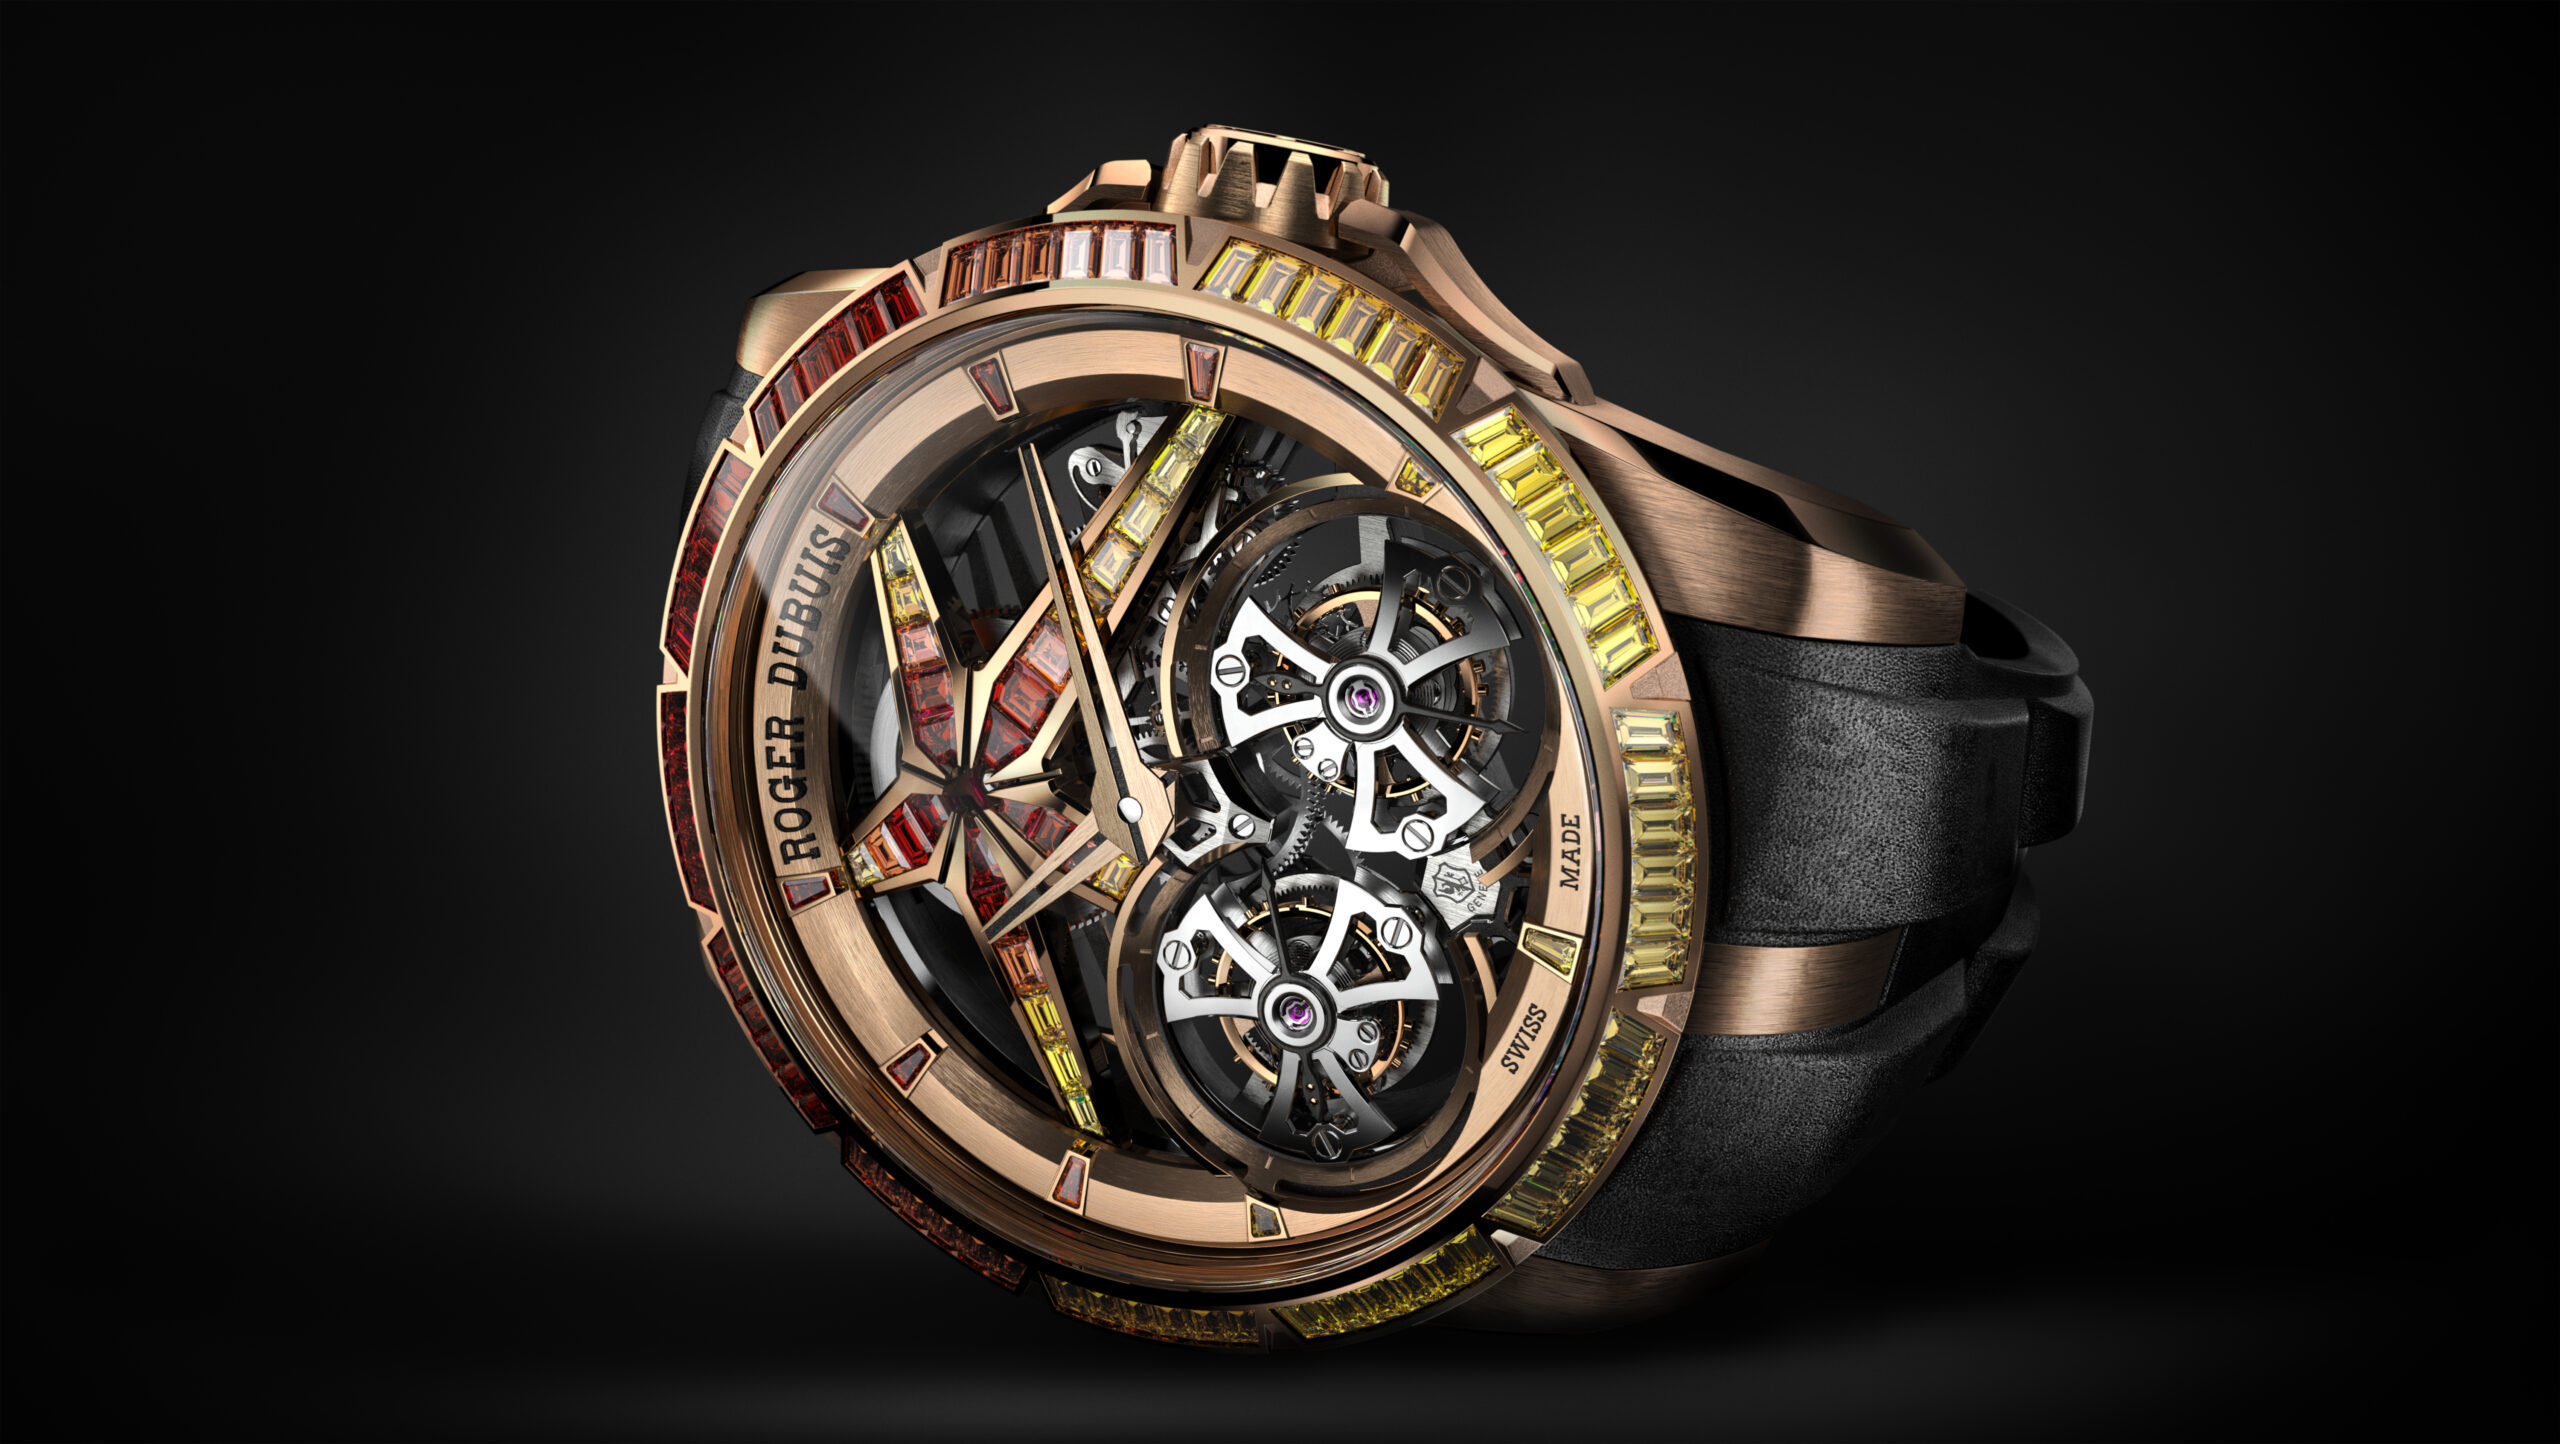 Roger Dubuis celebrates the Tourbillon in many forms